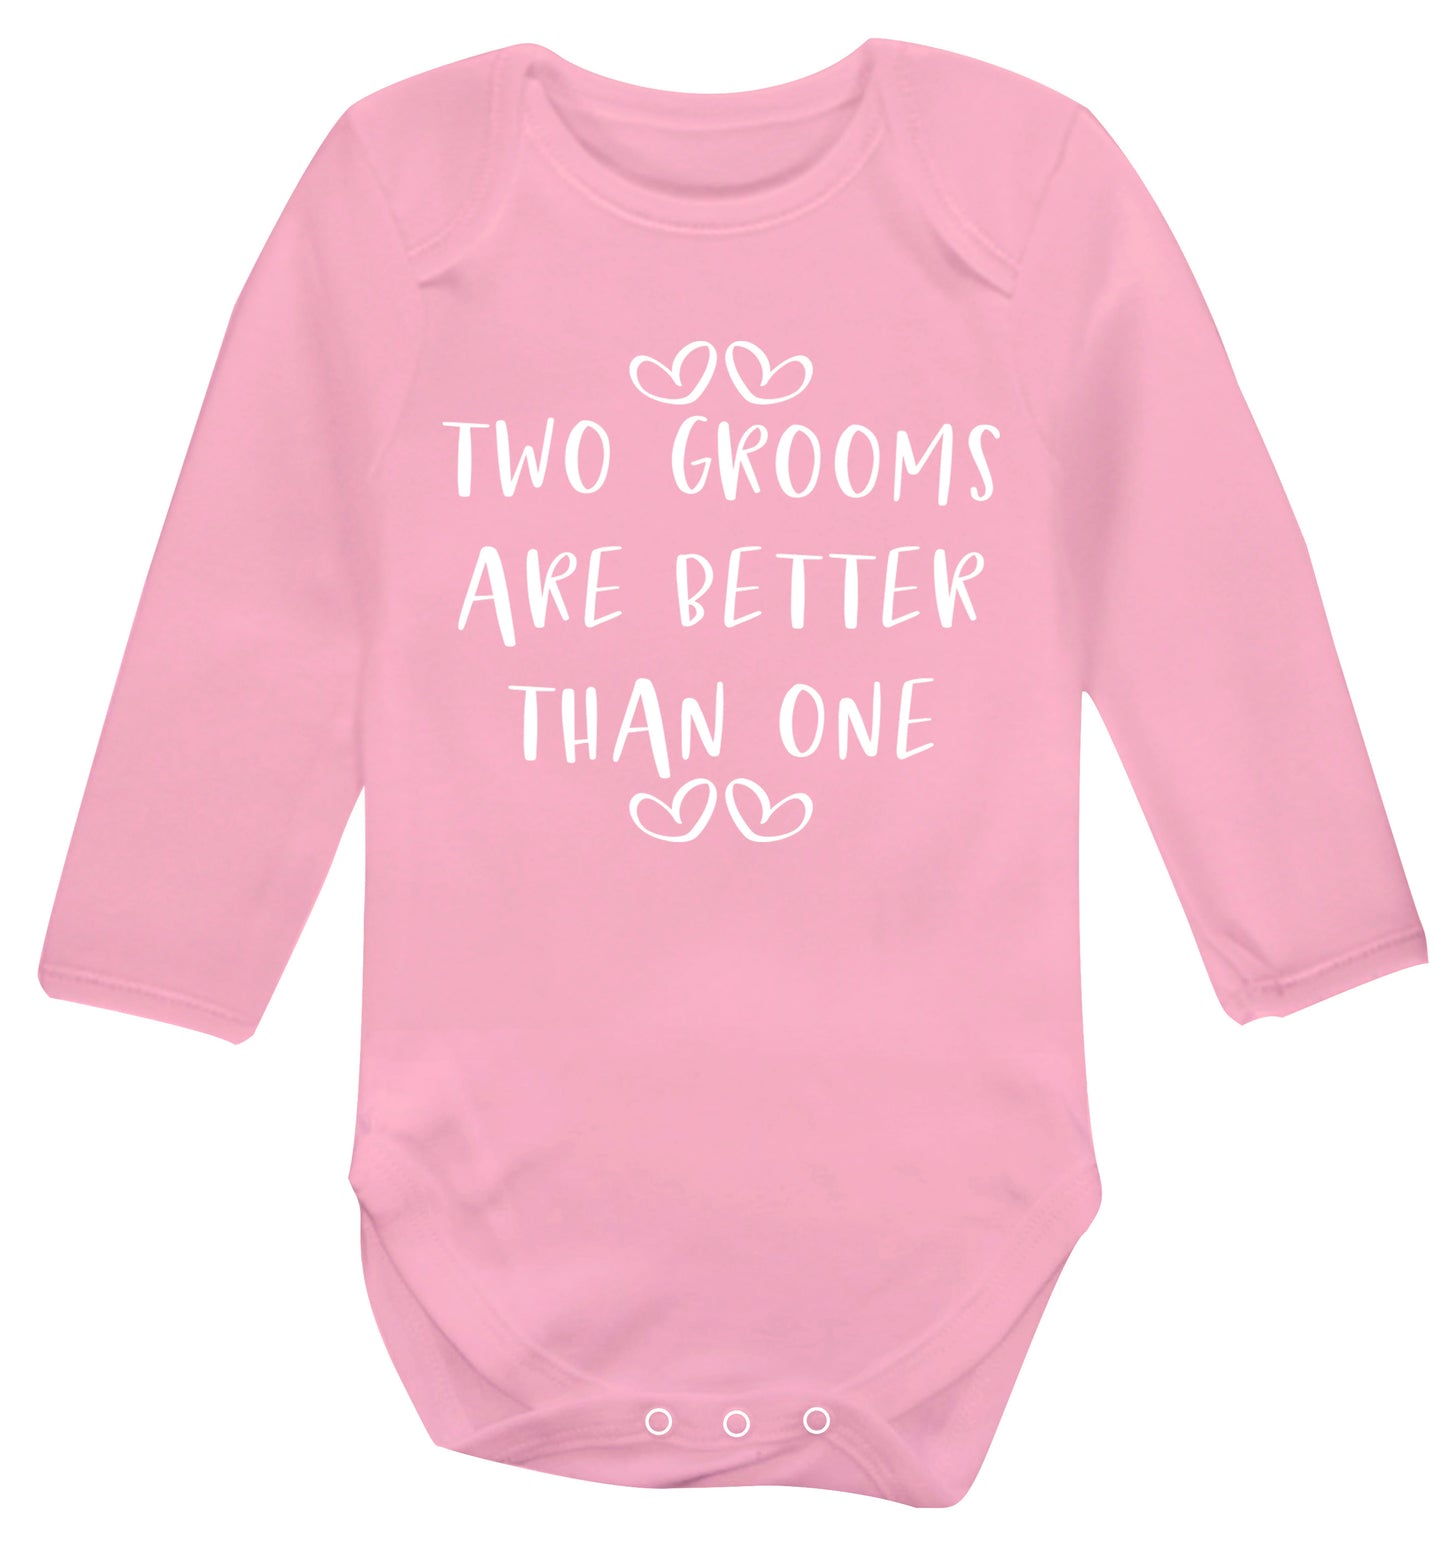 Two grooms are better than one baby vest long sleeved pale pink 6-12 months